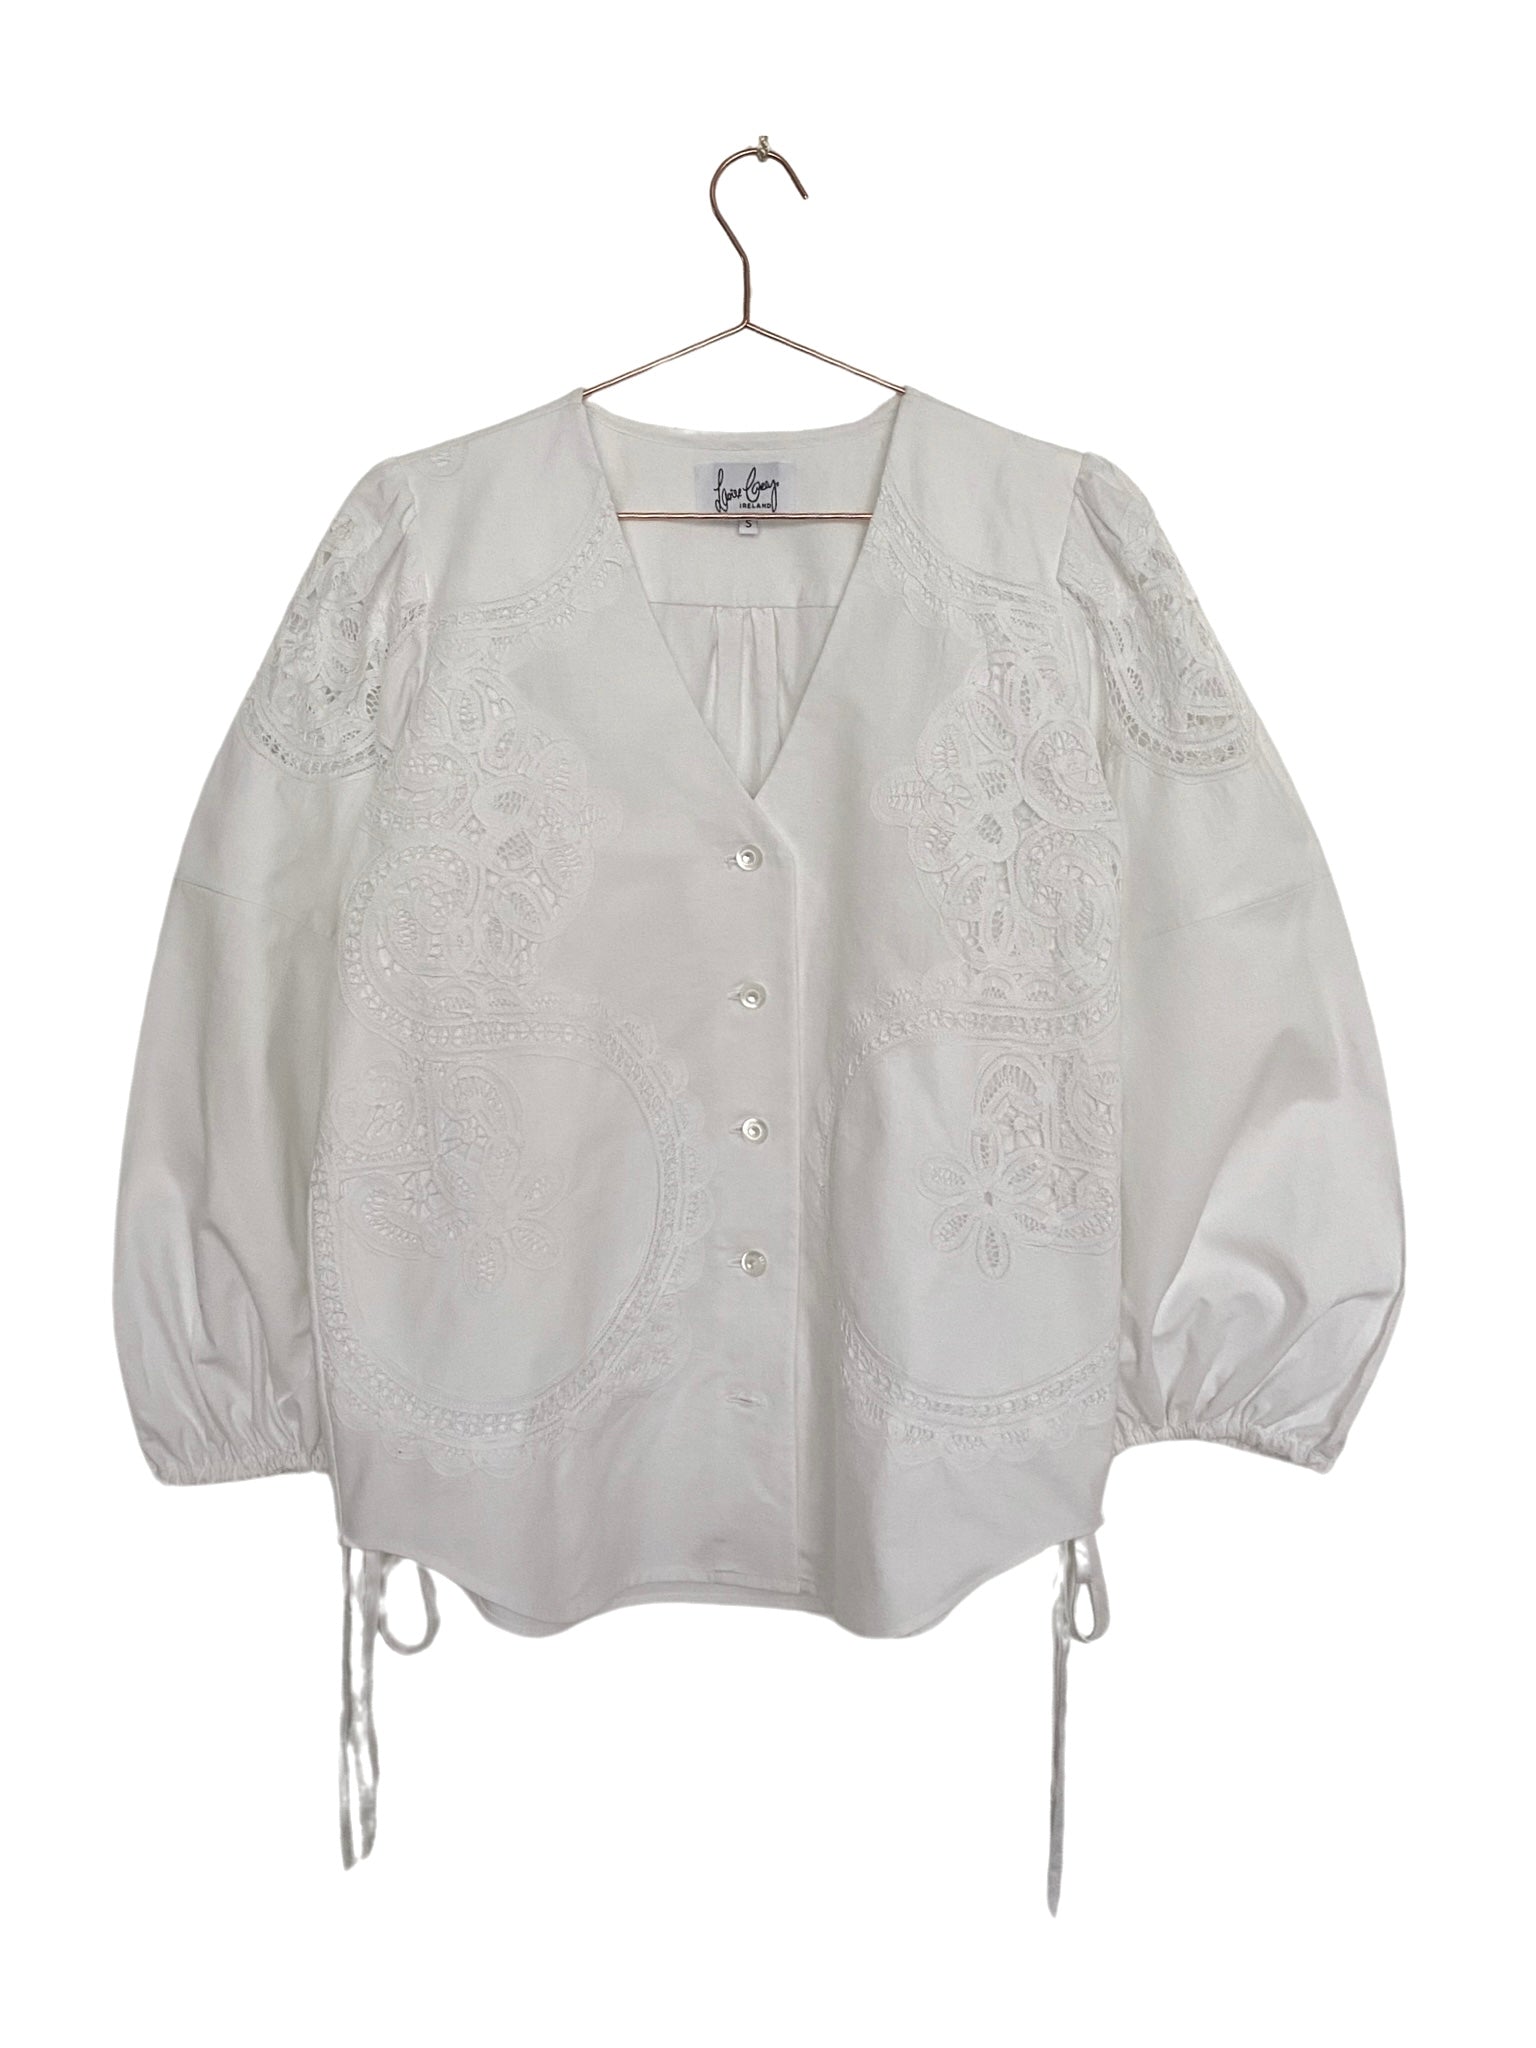 Claddagh Blouse White Lace S